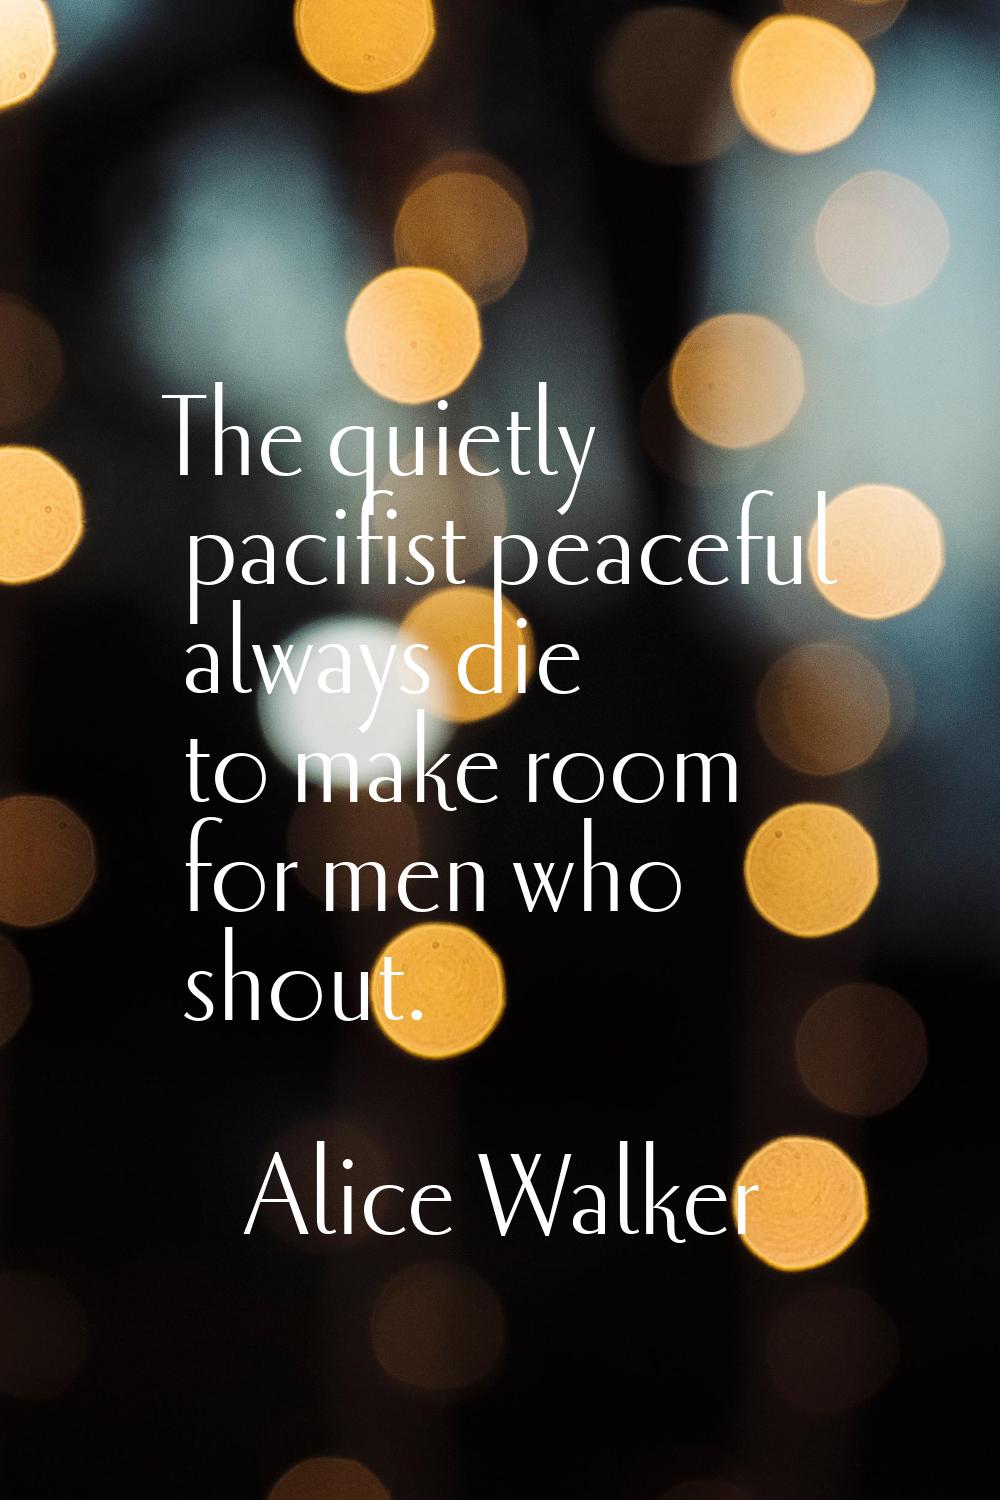 The quietly pacifist peaceful always die to make room for men who shout.